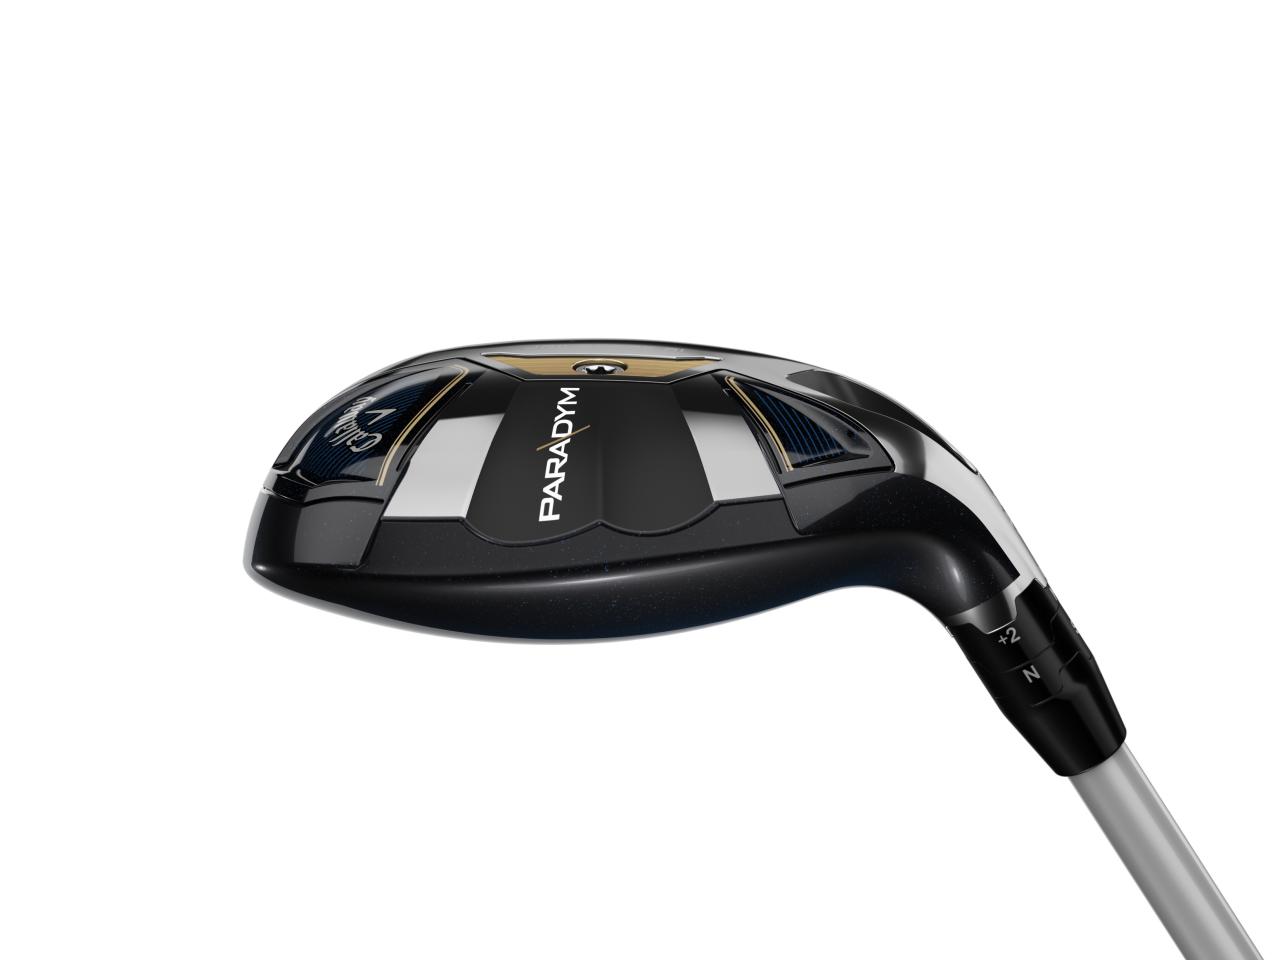 Callaway Paradym fairway woods, hybrids: What you need to know